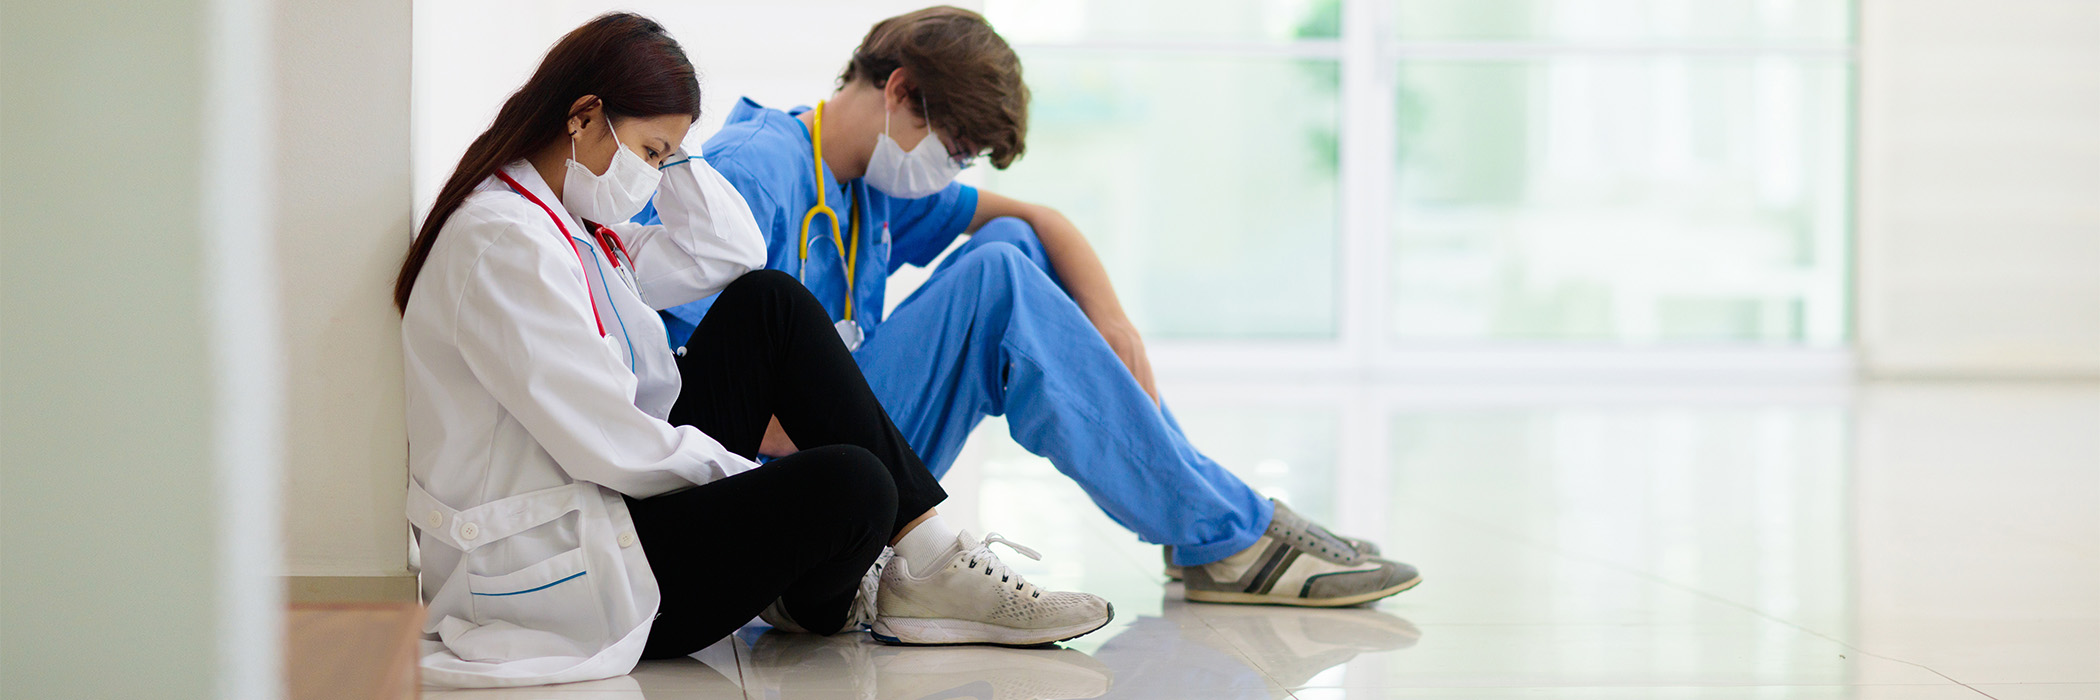 Exhausted nurse, doctor, medical practitioner sitting on care centre floor